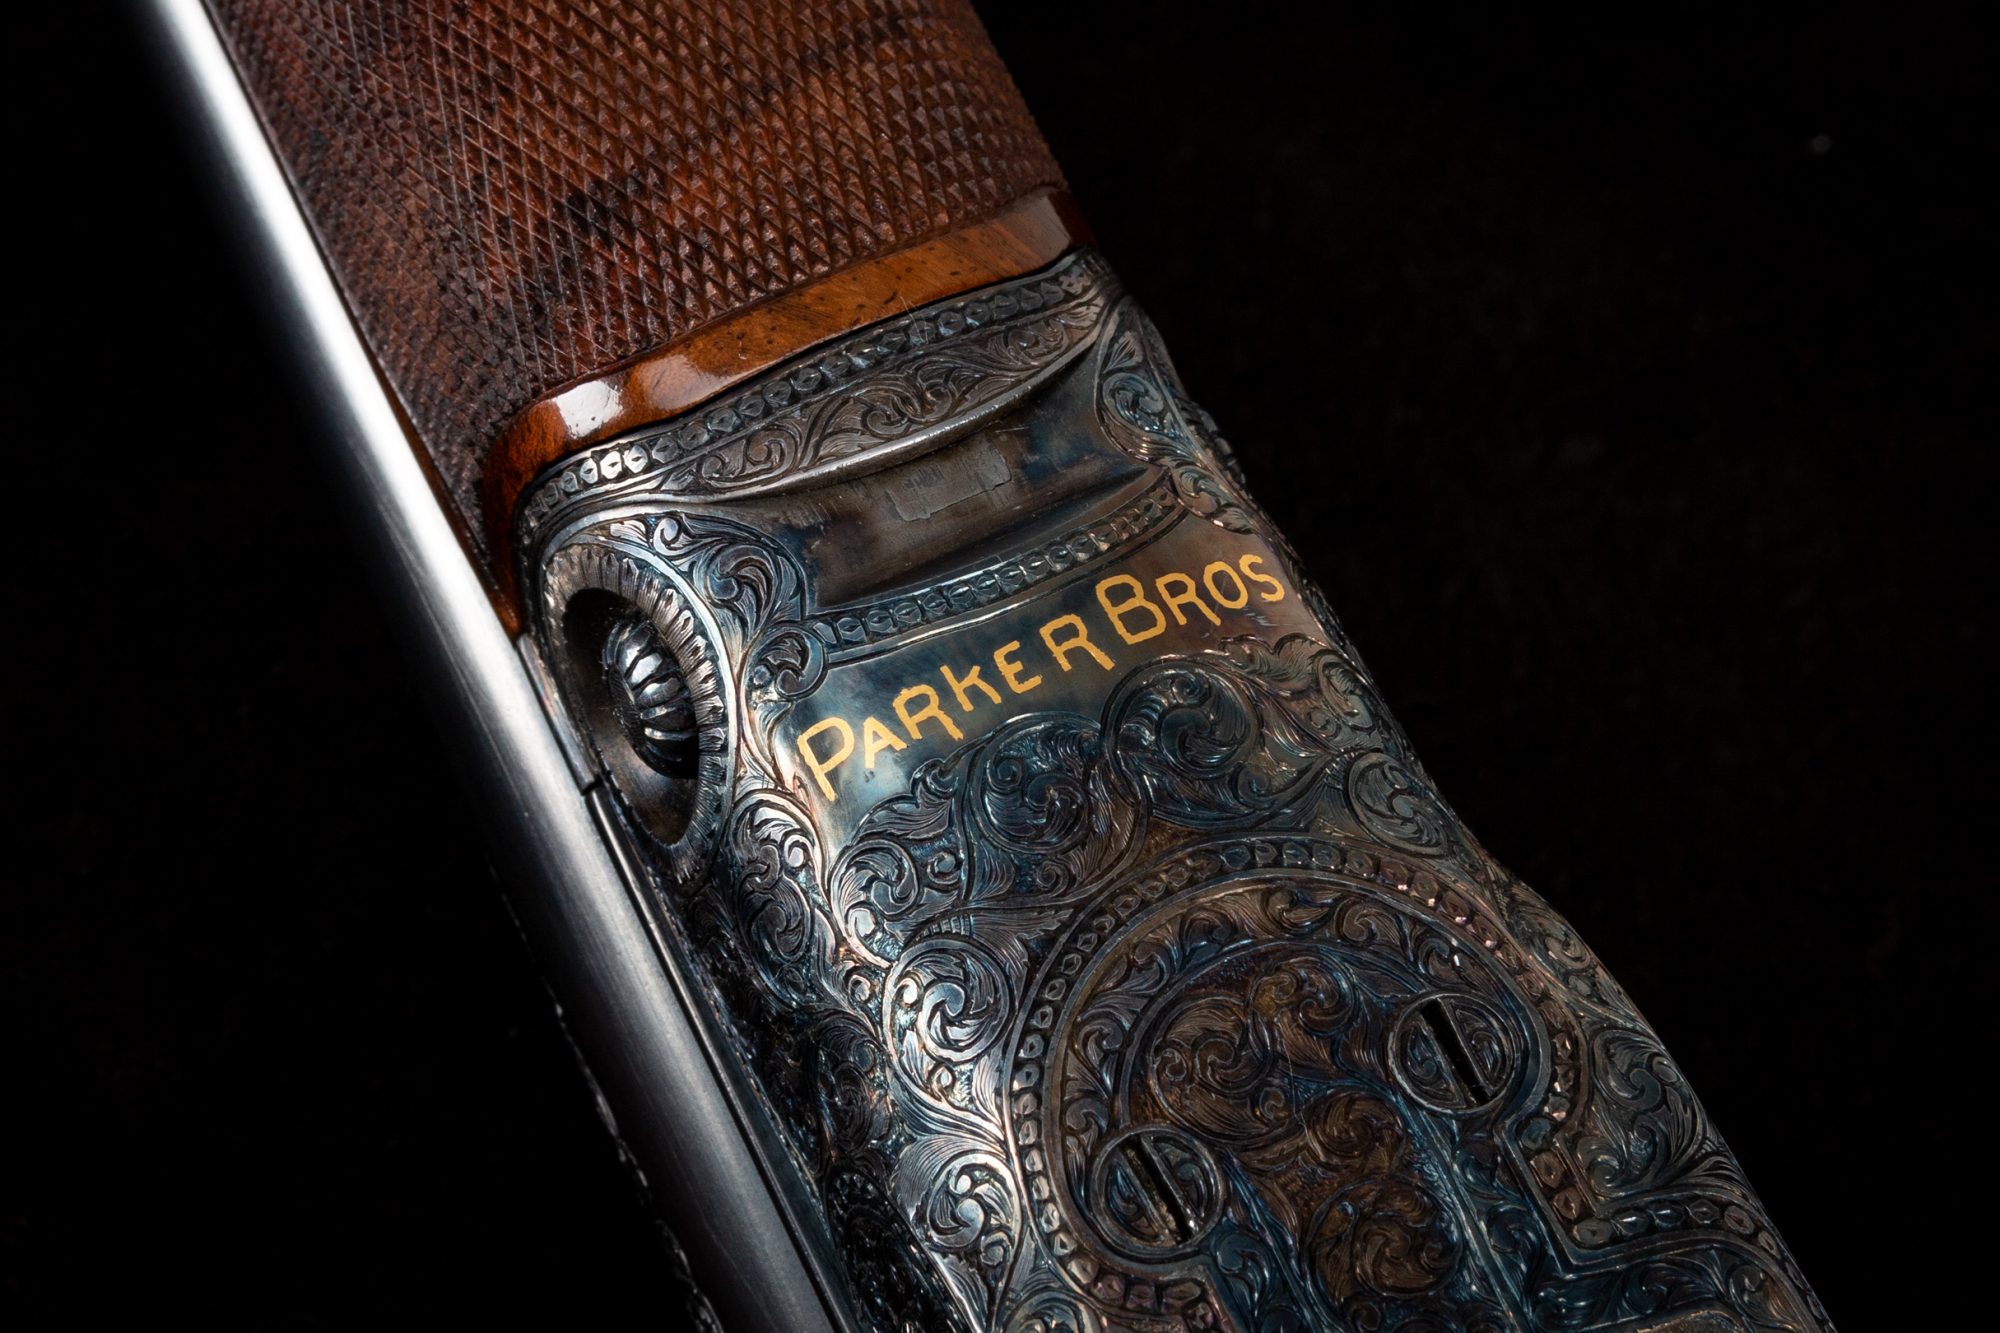 Photo of pre-owned Parker VHE 20 gauge shotgun, upgraded by previous owner to A1 Special. Features color case hardening and other metal finishes by Turnbull Restoration